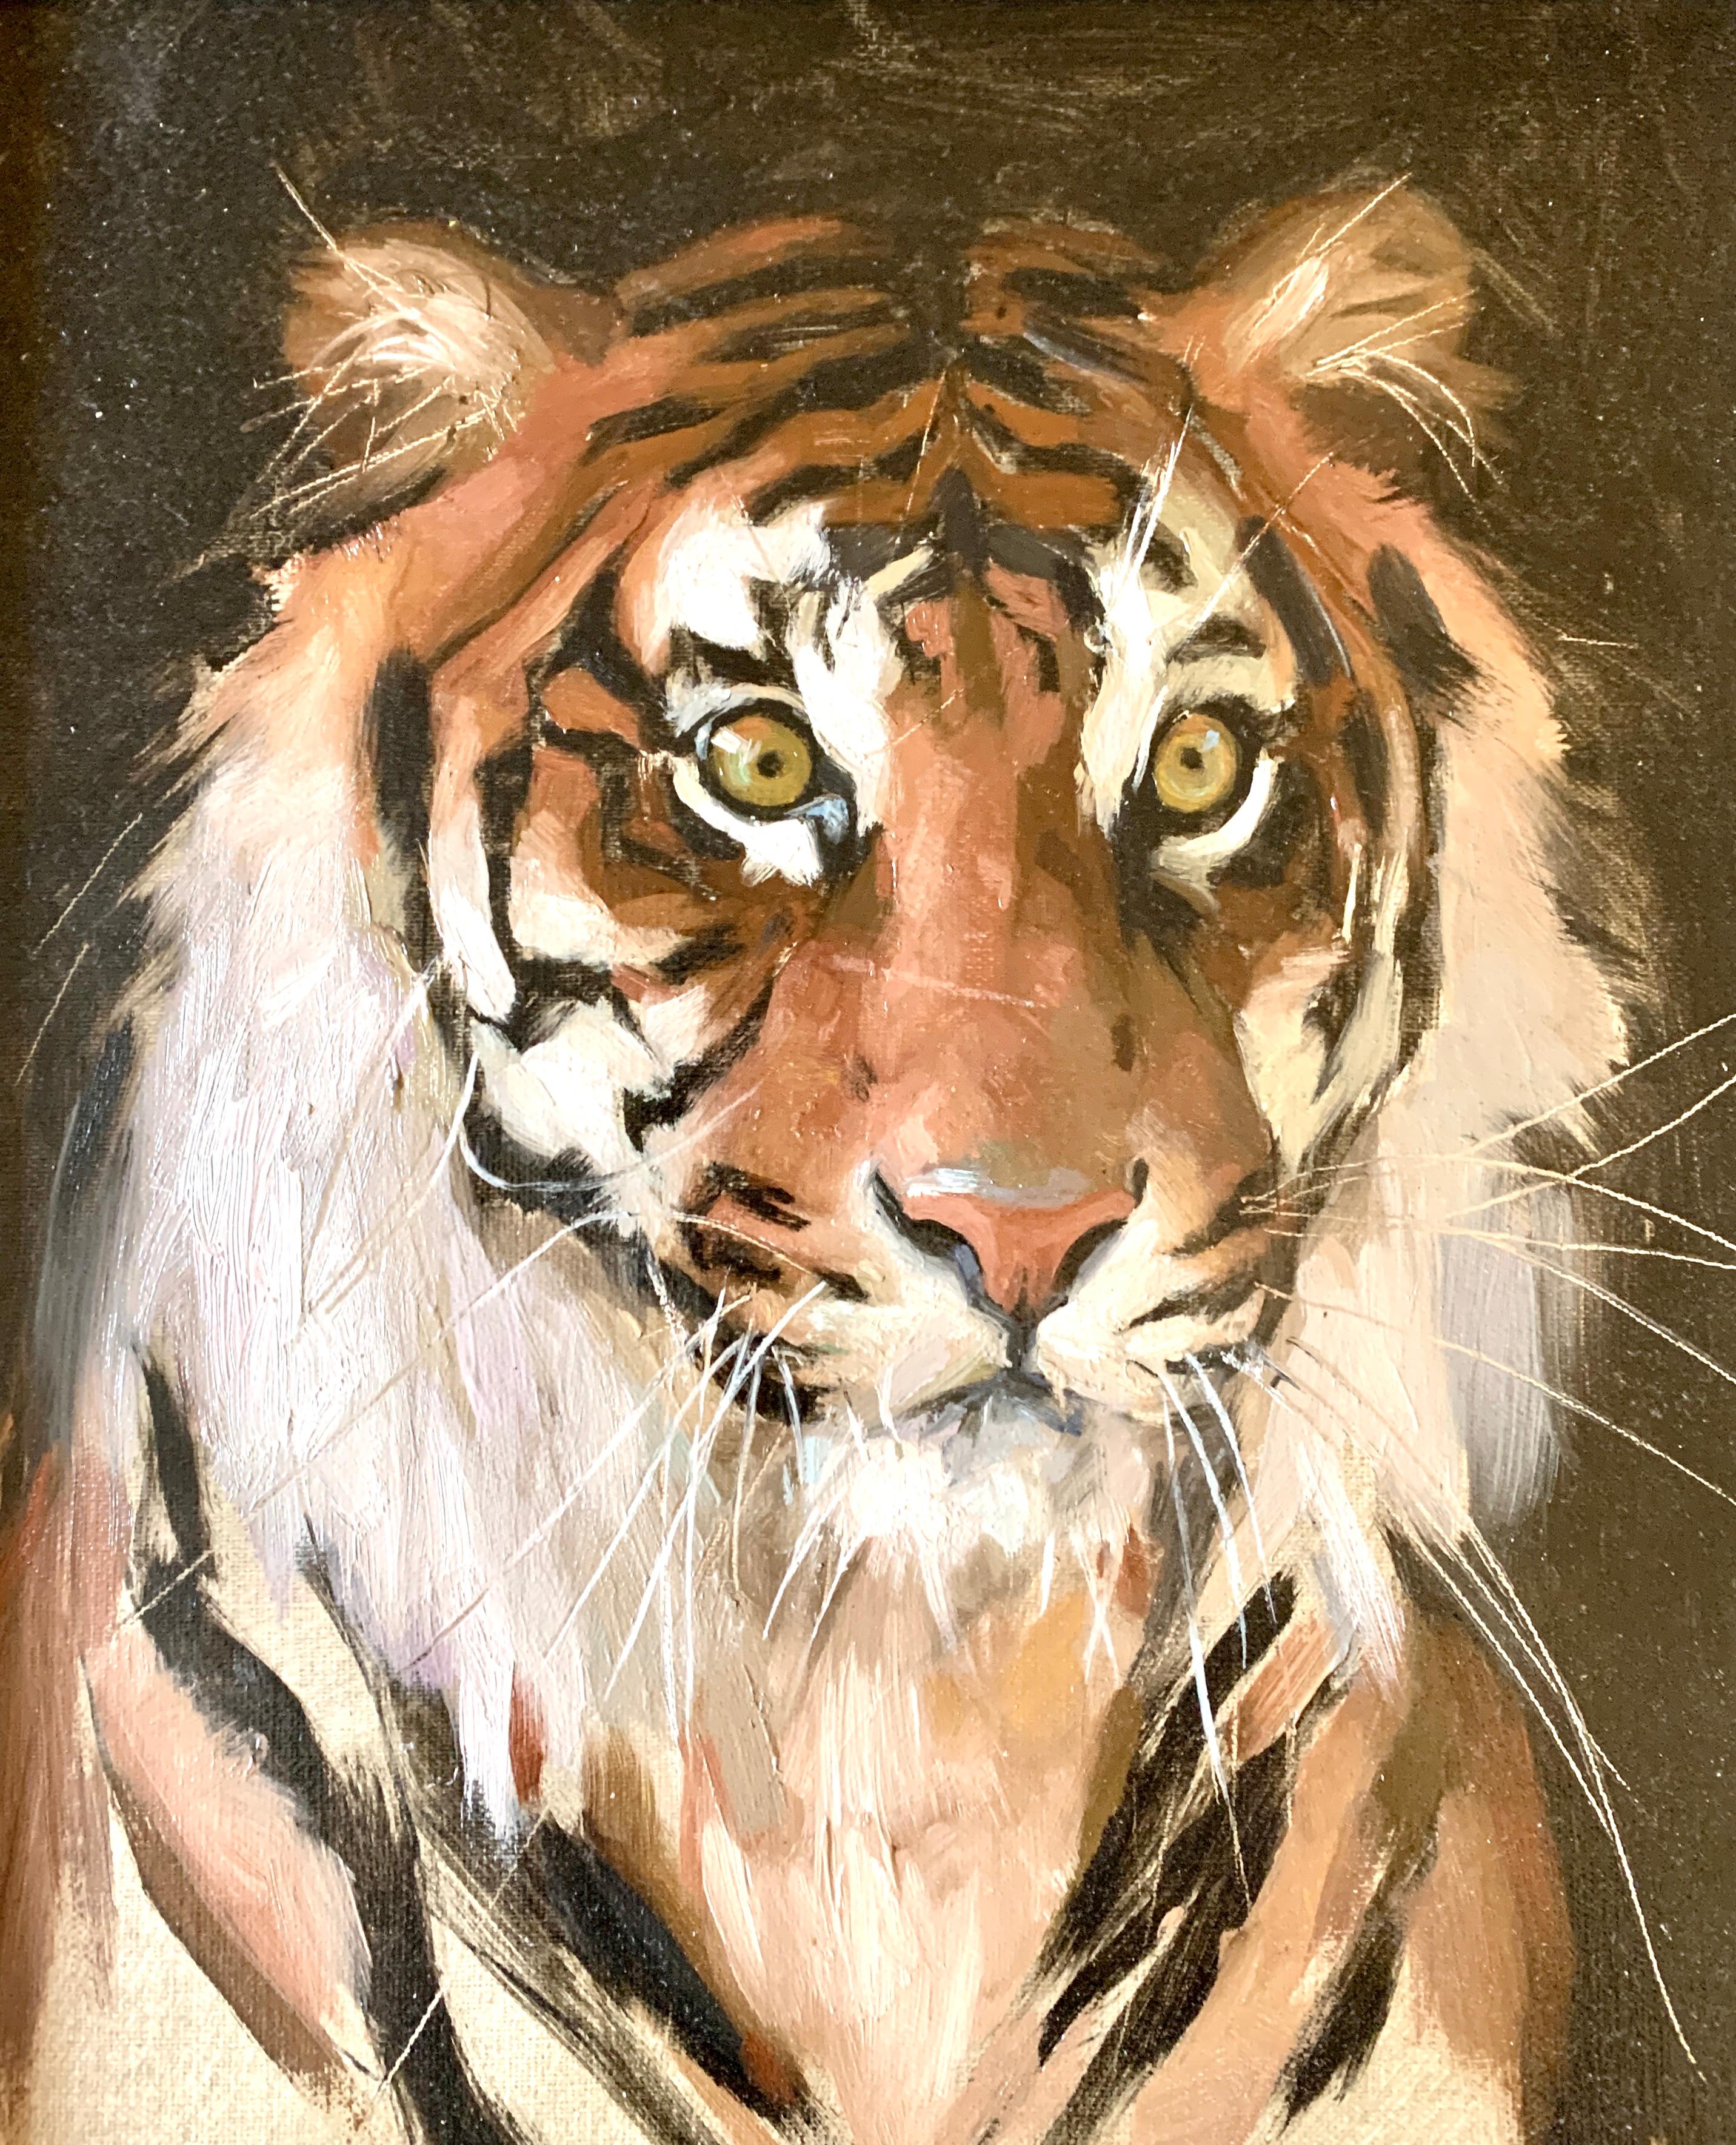 Portrait of a Tiger, looking at the painter/artist - Painting by Jennifer Gennari